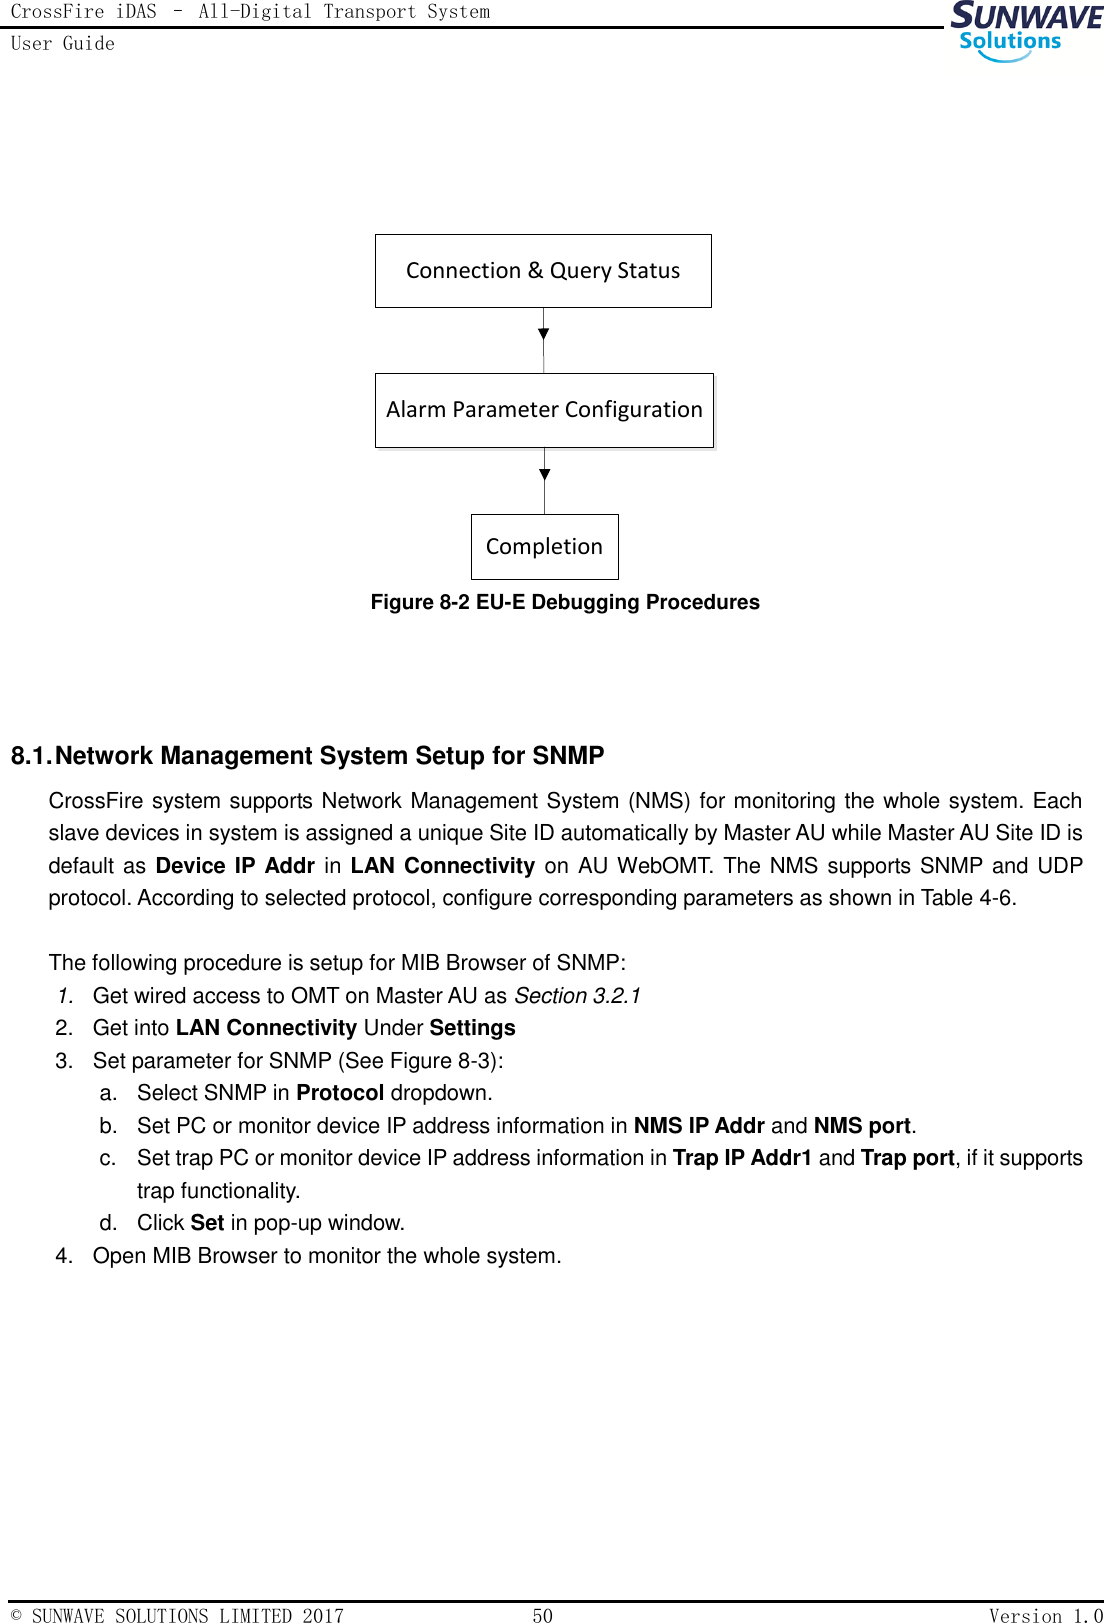 CrossFire iDAS – All-Digital Transport System User Guide   © SUNWAVE SOLUTIONS LIMITED 2017  50  Version 1.0     Connection &amp; Query StatusAlarm Parameter ConfigurationCompletion Figure 8-2 EU-E Debugging Procedures                           8.1. Network Management System Setup for SNMP CrossFire system supports Network Management System (NMS) for monitoring the whole system. Each slave devices in system is assigned a unique Site ID automatically by Master AU while Master AU Site ID is default as Device IP Addr in LAN Connectivity on AU WebOMT. The NMS supports SNMP and UDP protocol. According to selected protocol, configure corresponding parameters as shown in Table 4-6.  The following procedure is setup for MIB Browser of SNMP: 1. Get wired access to OMT on Master AU as Section 3.2.1 2.  Get into LAN Connectivity Under Settings 3.  Set parameter for SNMP (See Figure 8-3): a.  Select SNMP in Protocol dropdown. b.  Set PC or monitor device IP address information in NMS IP Addr and NMS port. c.  Set trap PC or monitor device IP address information in Trap IP Addr1 and Trap port, if it supports trap functionality. d.  Click Set in pop-up window. 4.  Open MIB Browser to monitor the whole system. 